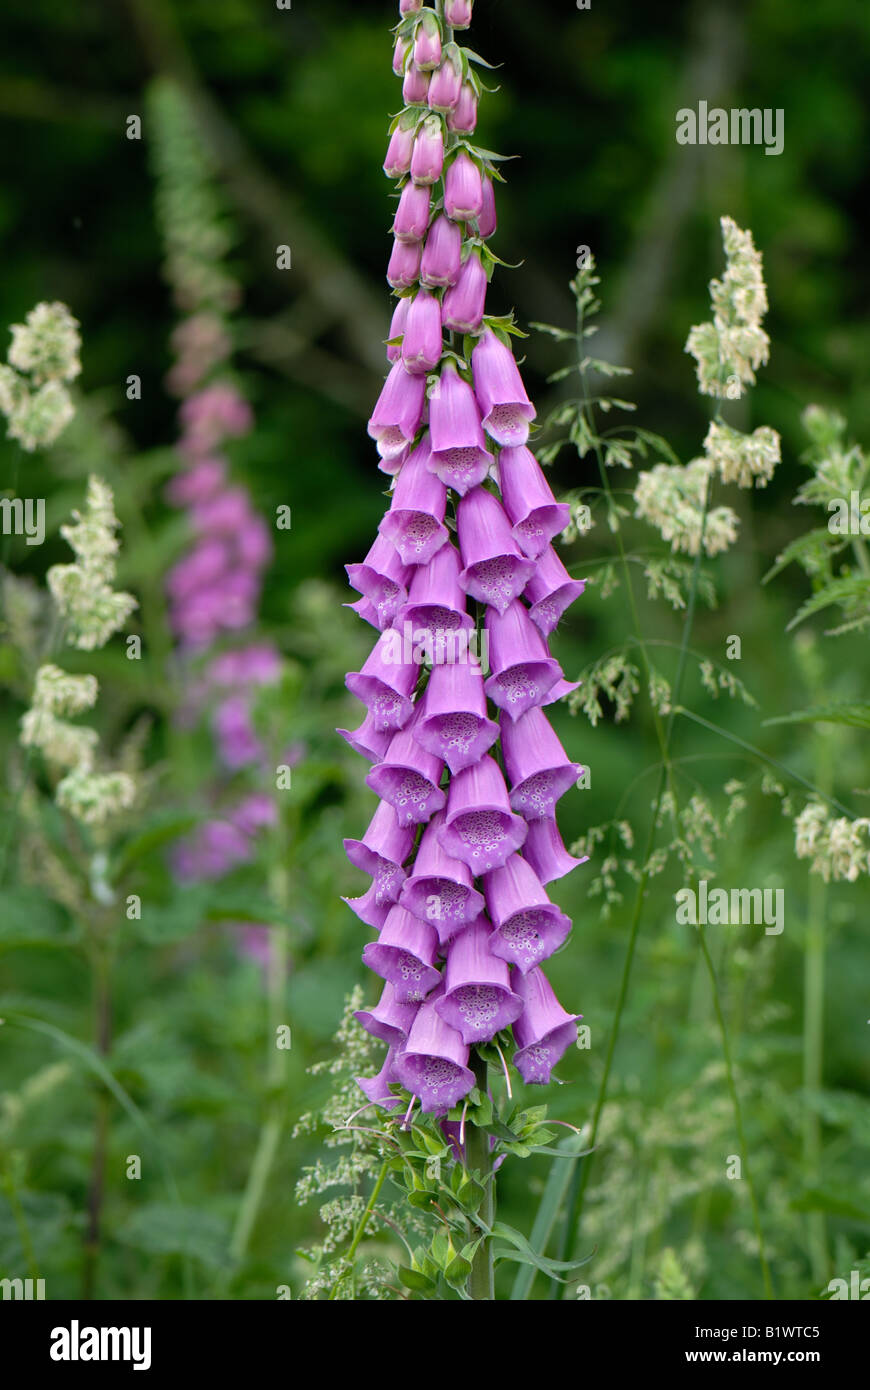 Flowering foxglove plant with florets partly opened against a woodland background Stock Photo